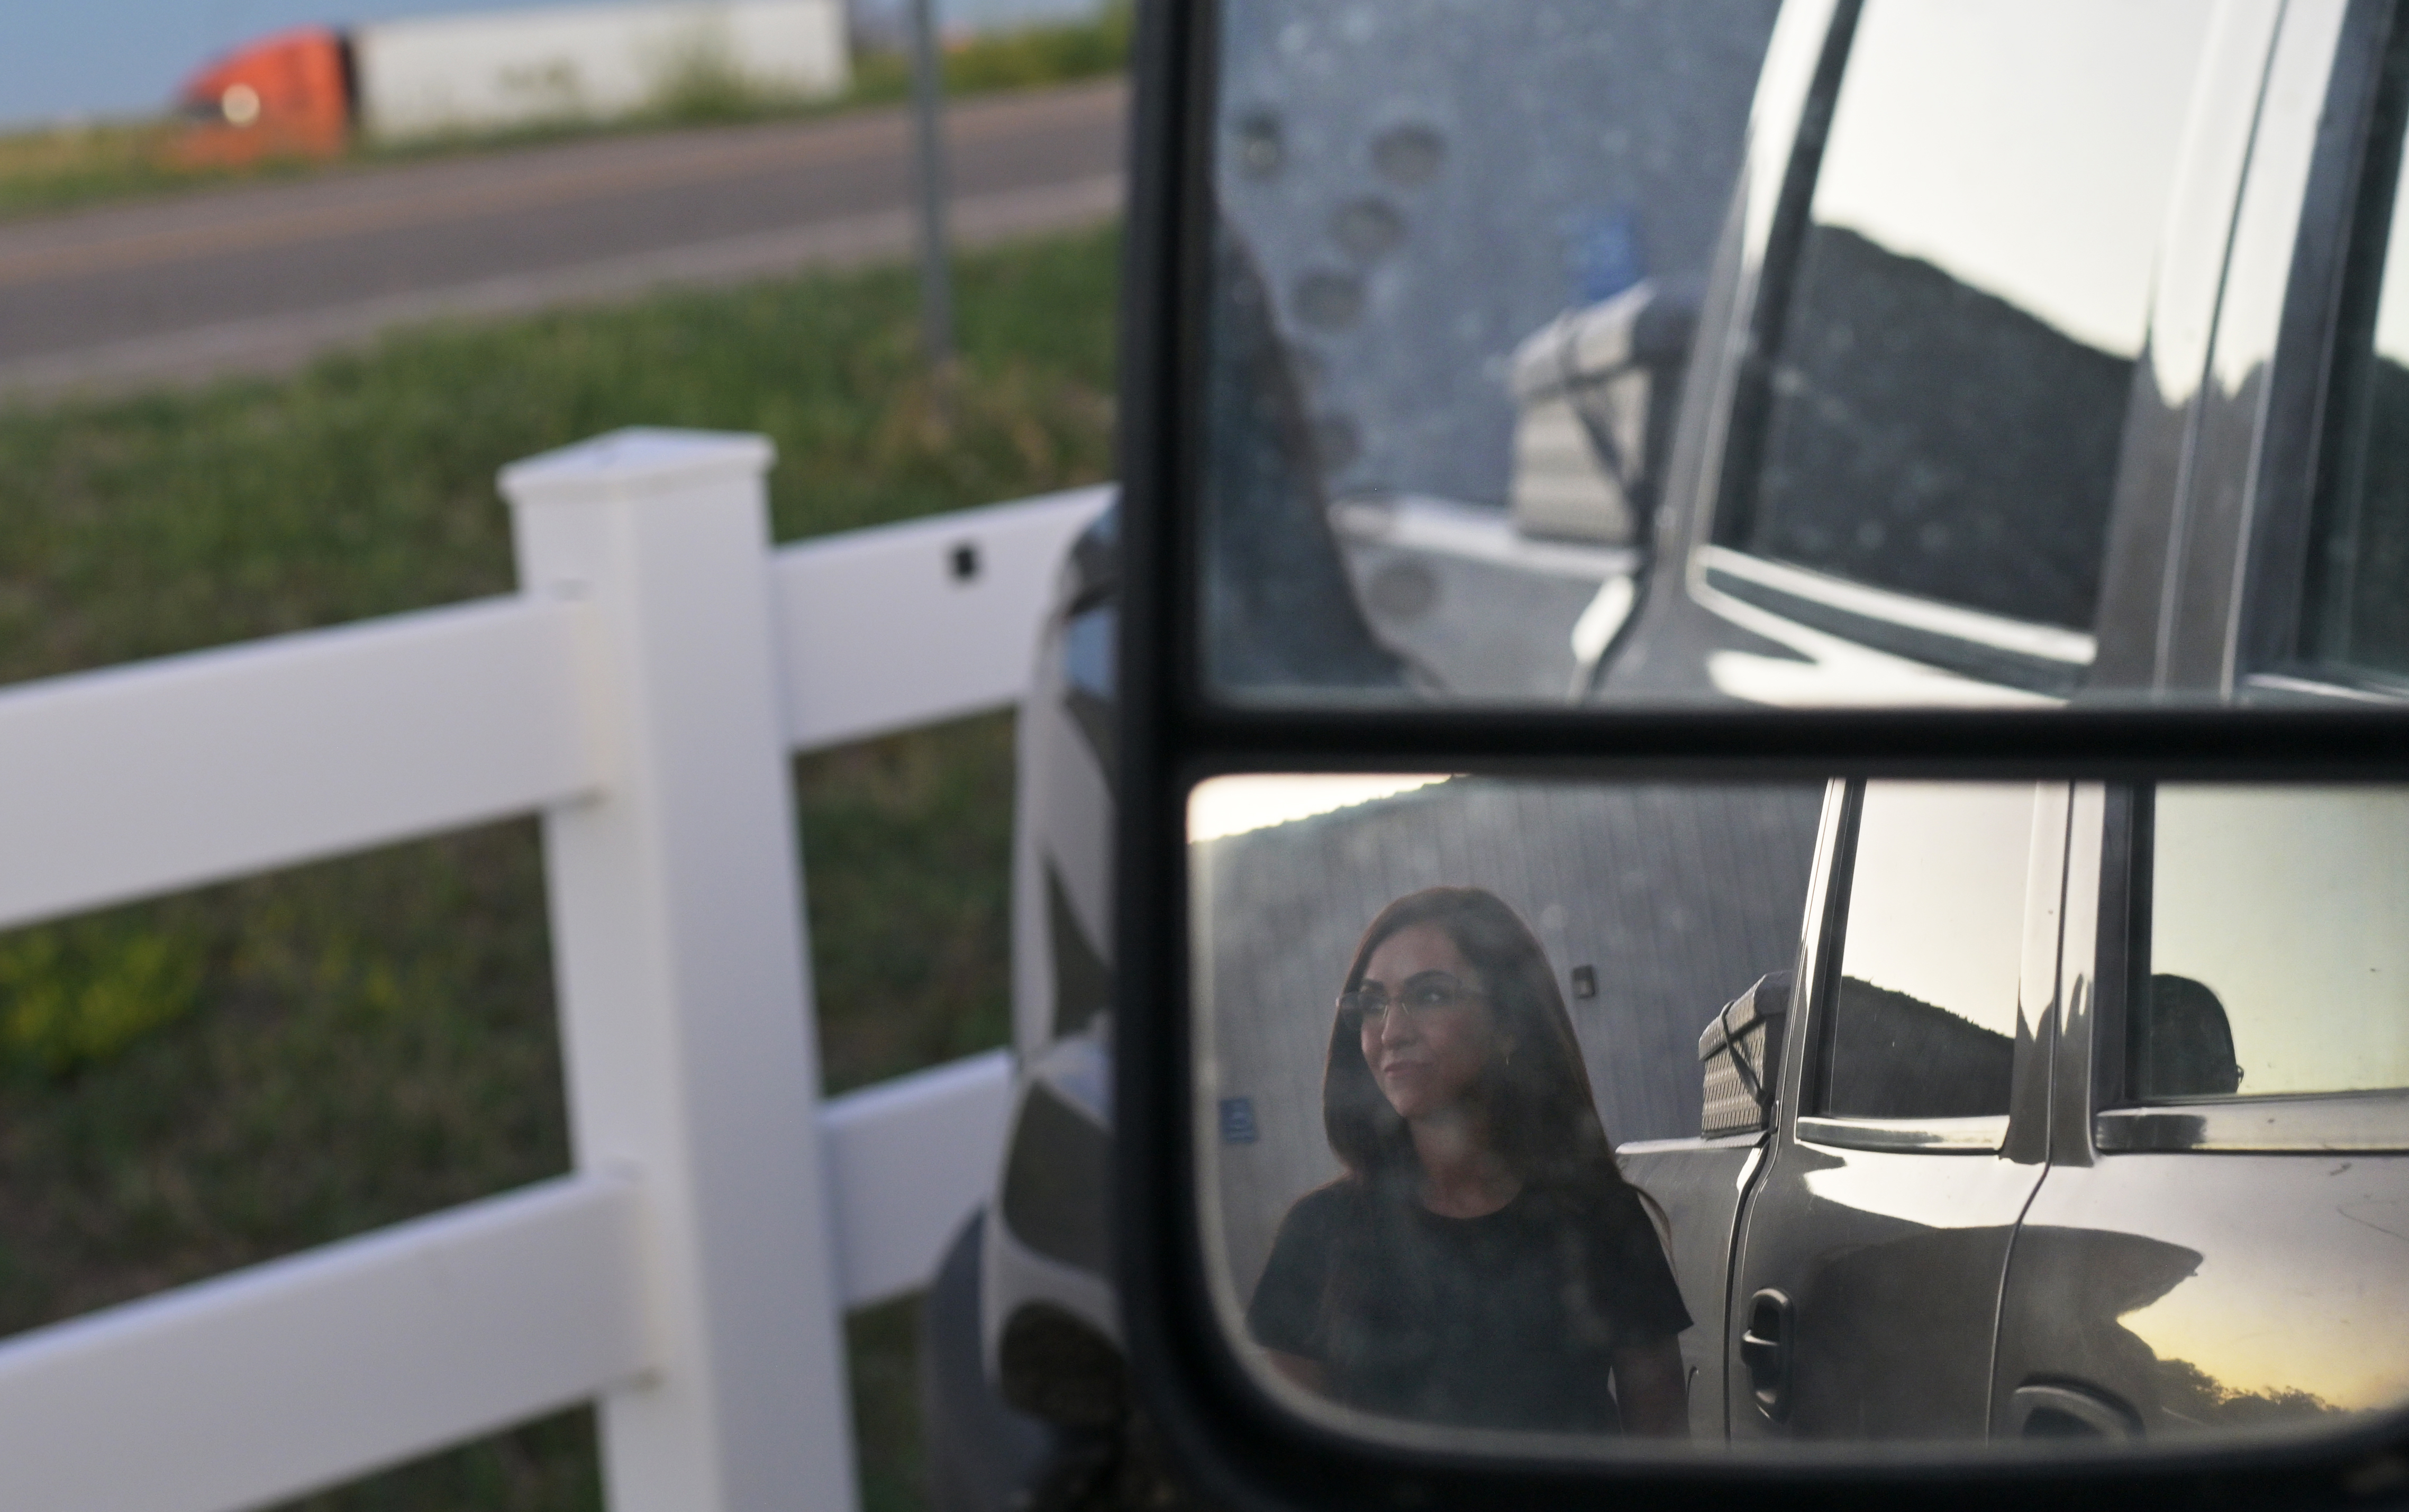 U.S. Rep. Lauren Boebert is seen in a truck mirror as she walks outside after a debate put on by the Colorado Farm Bureau for Republican candidates running in the 4th Congressional District primary race at the Stratton Activity Center in Stratton, Colorado, on June 6, 2024. (Photo by RJ Sangosti/The Denver Post)